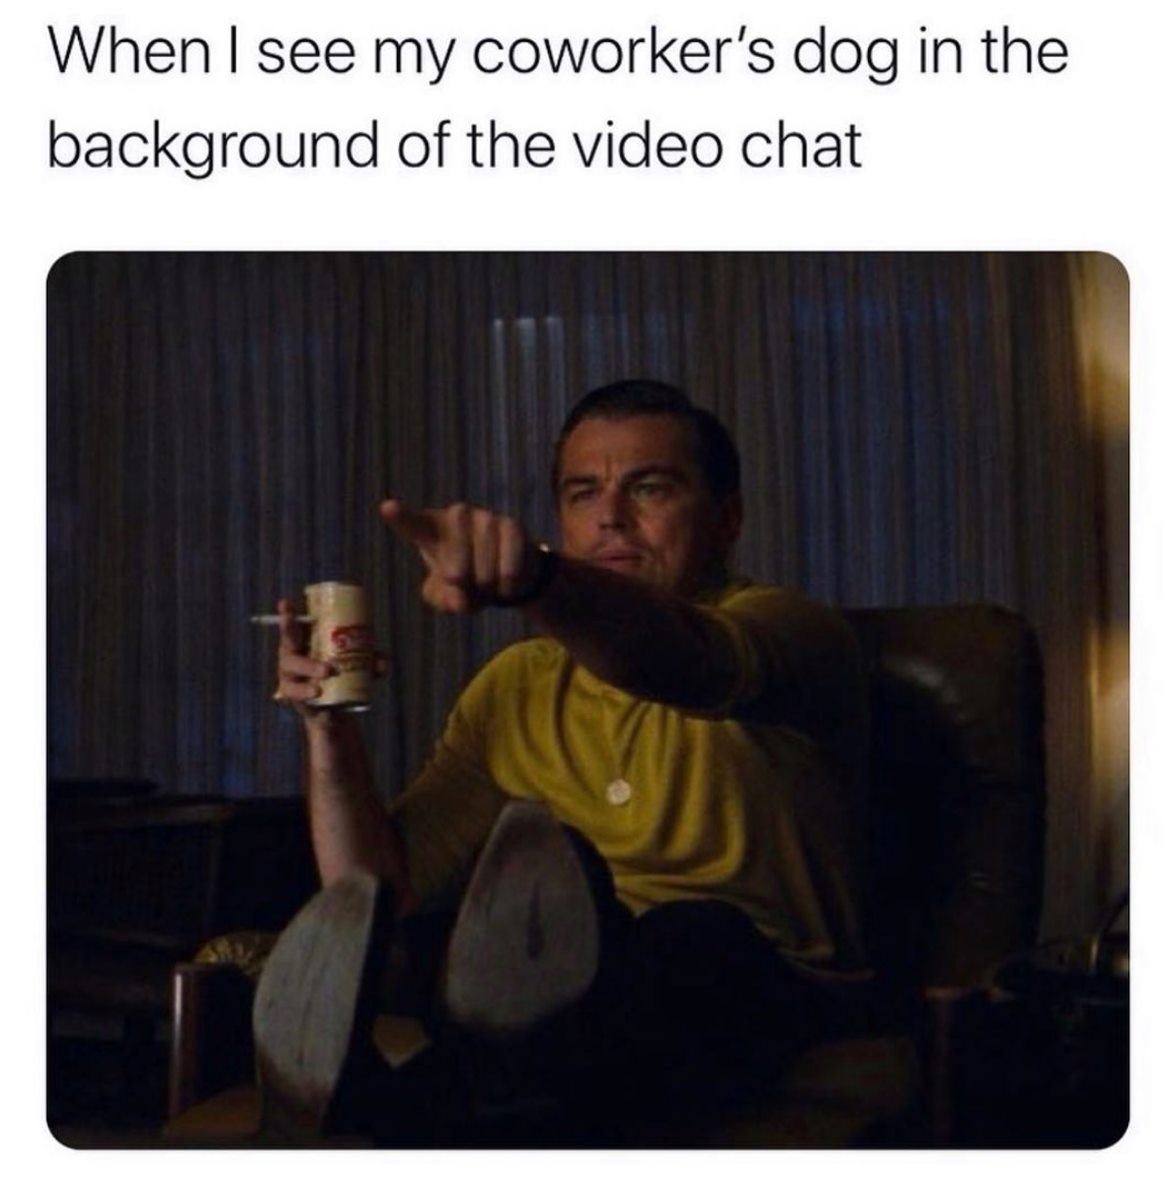 handy dandy notebook meme - When I see my coworker's dog in the background of the video chat